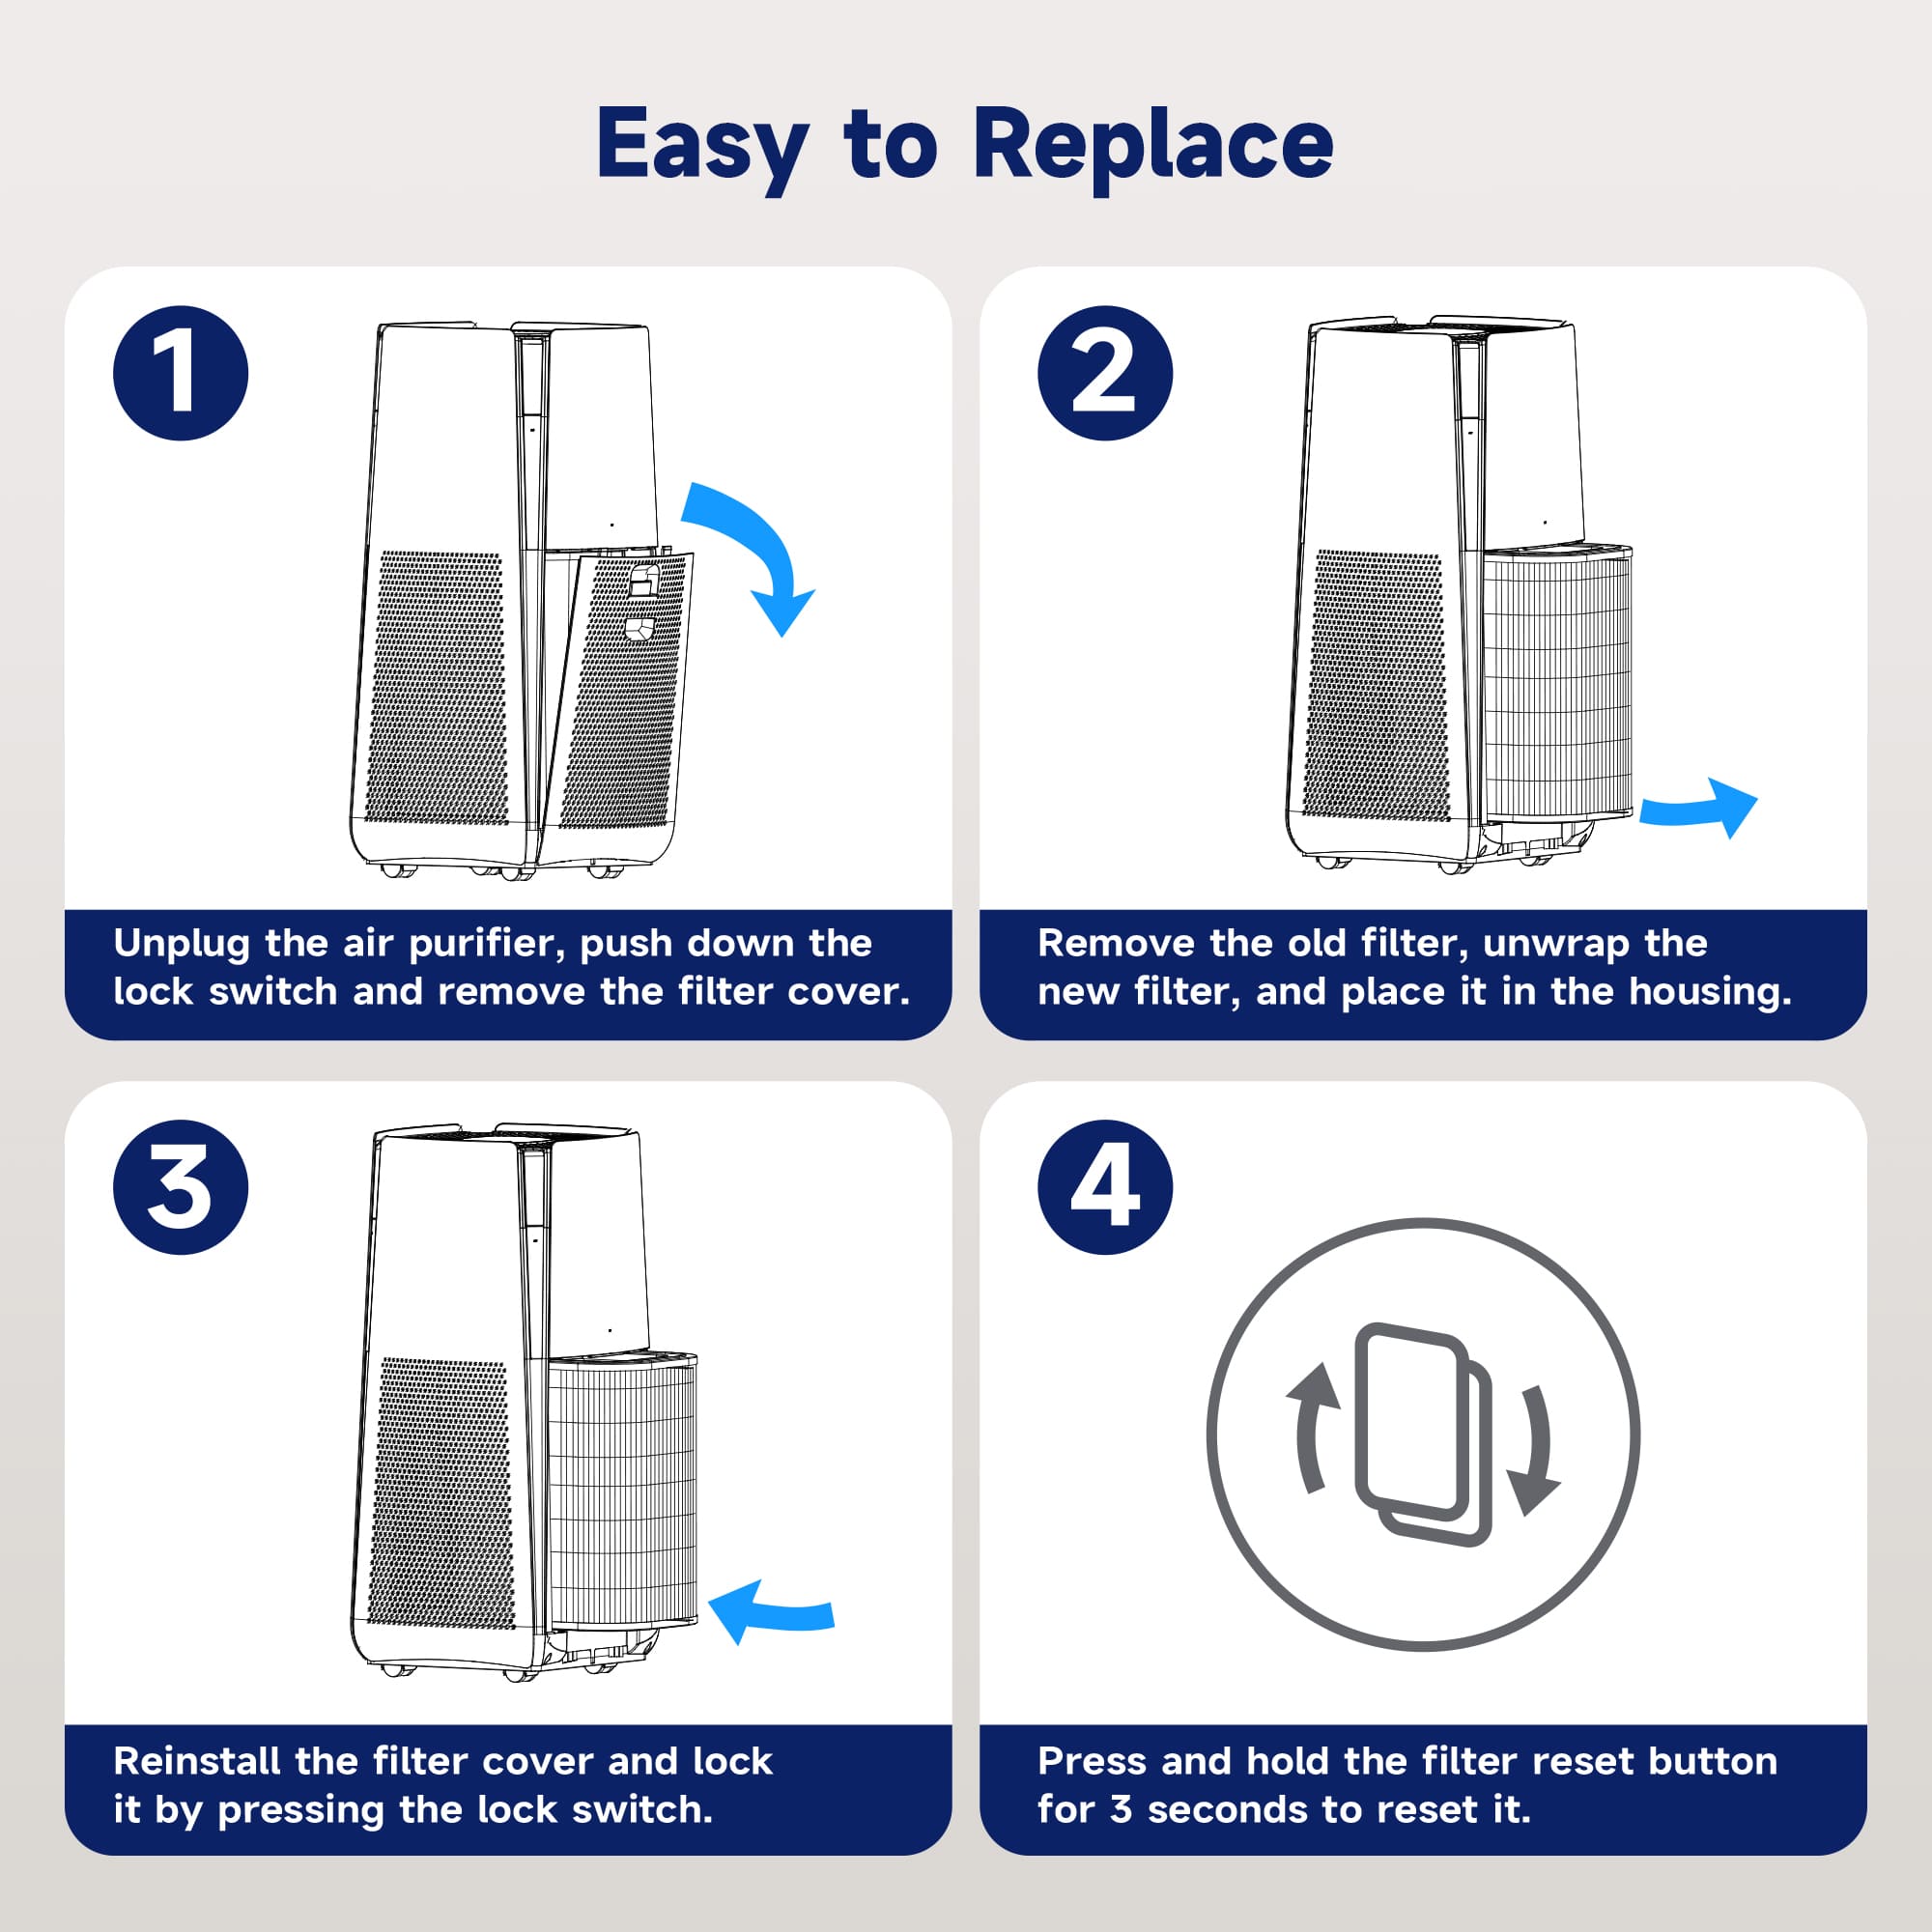 Step-by-Step Installation Guide for the MS601 Air Filter.